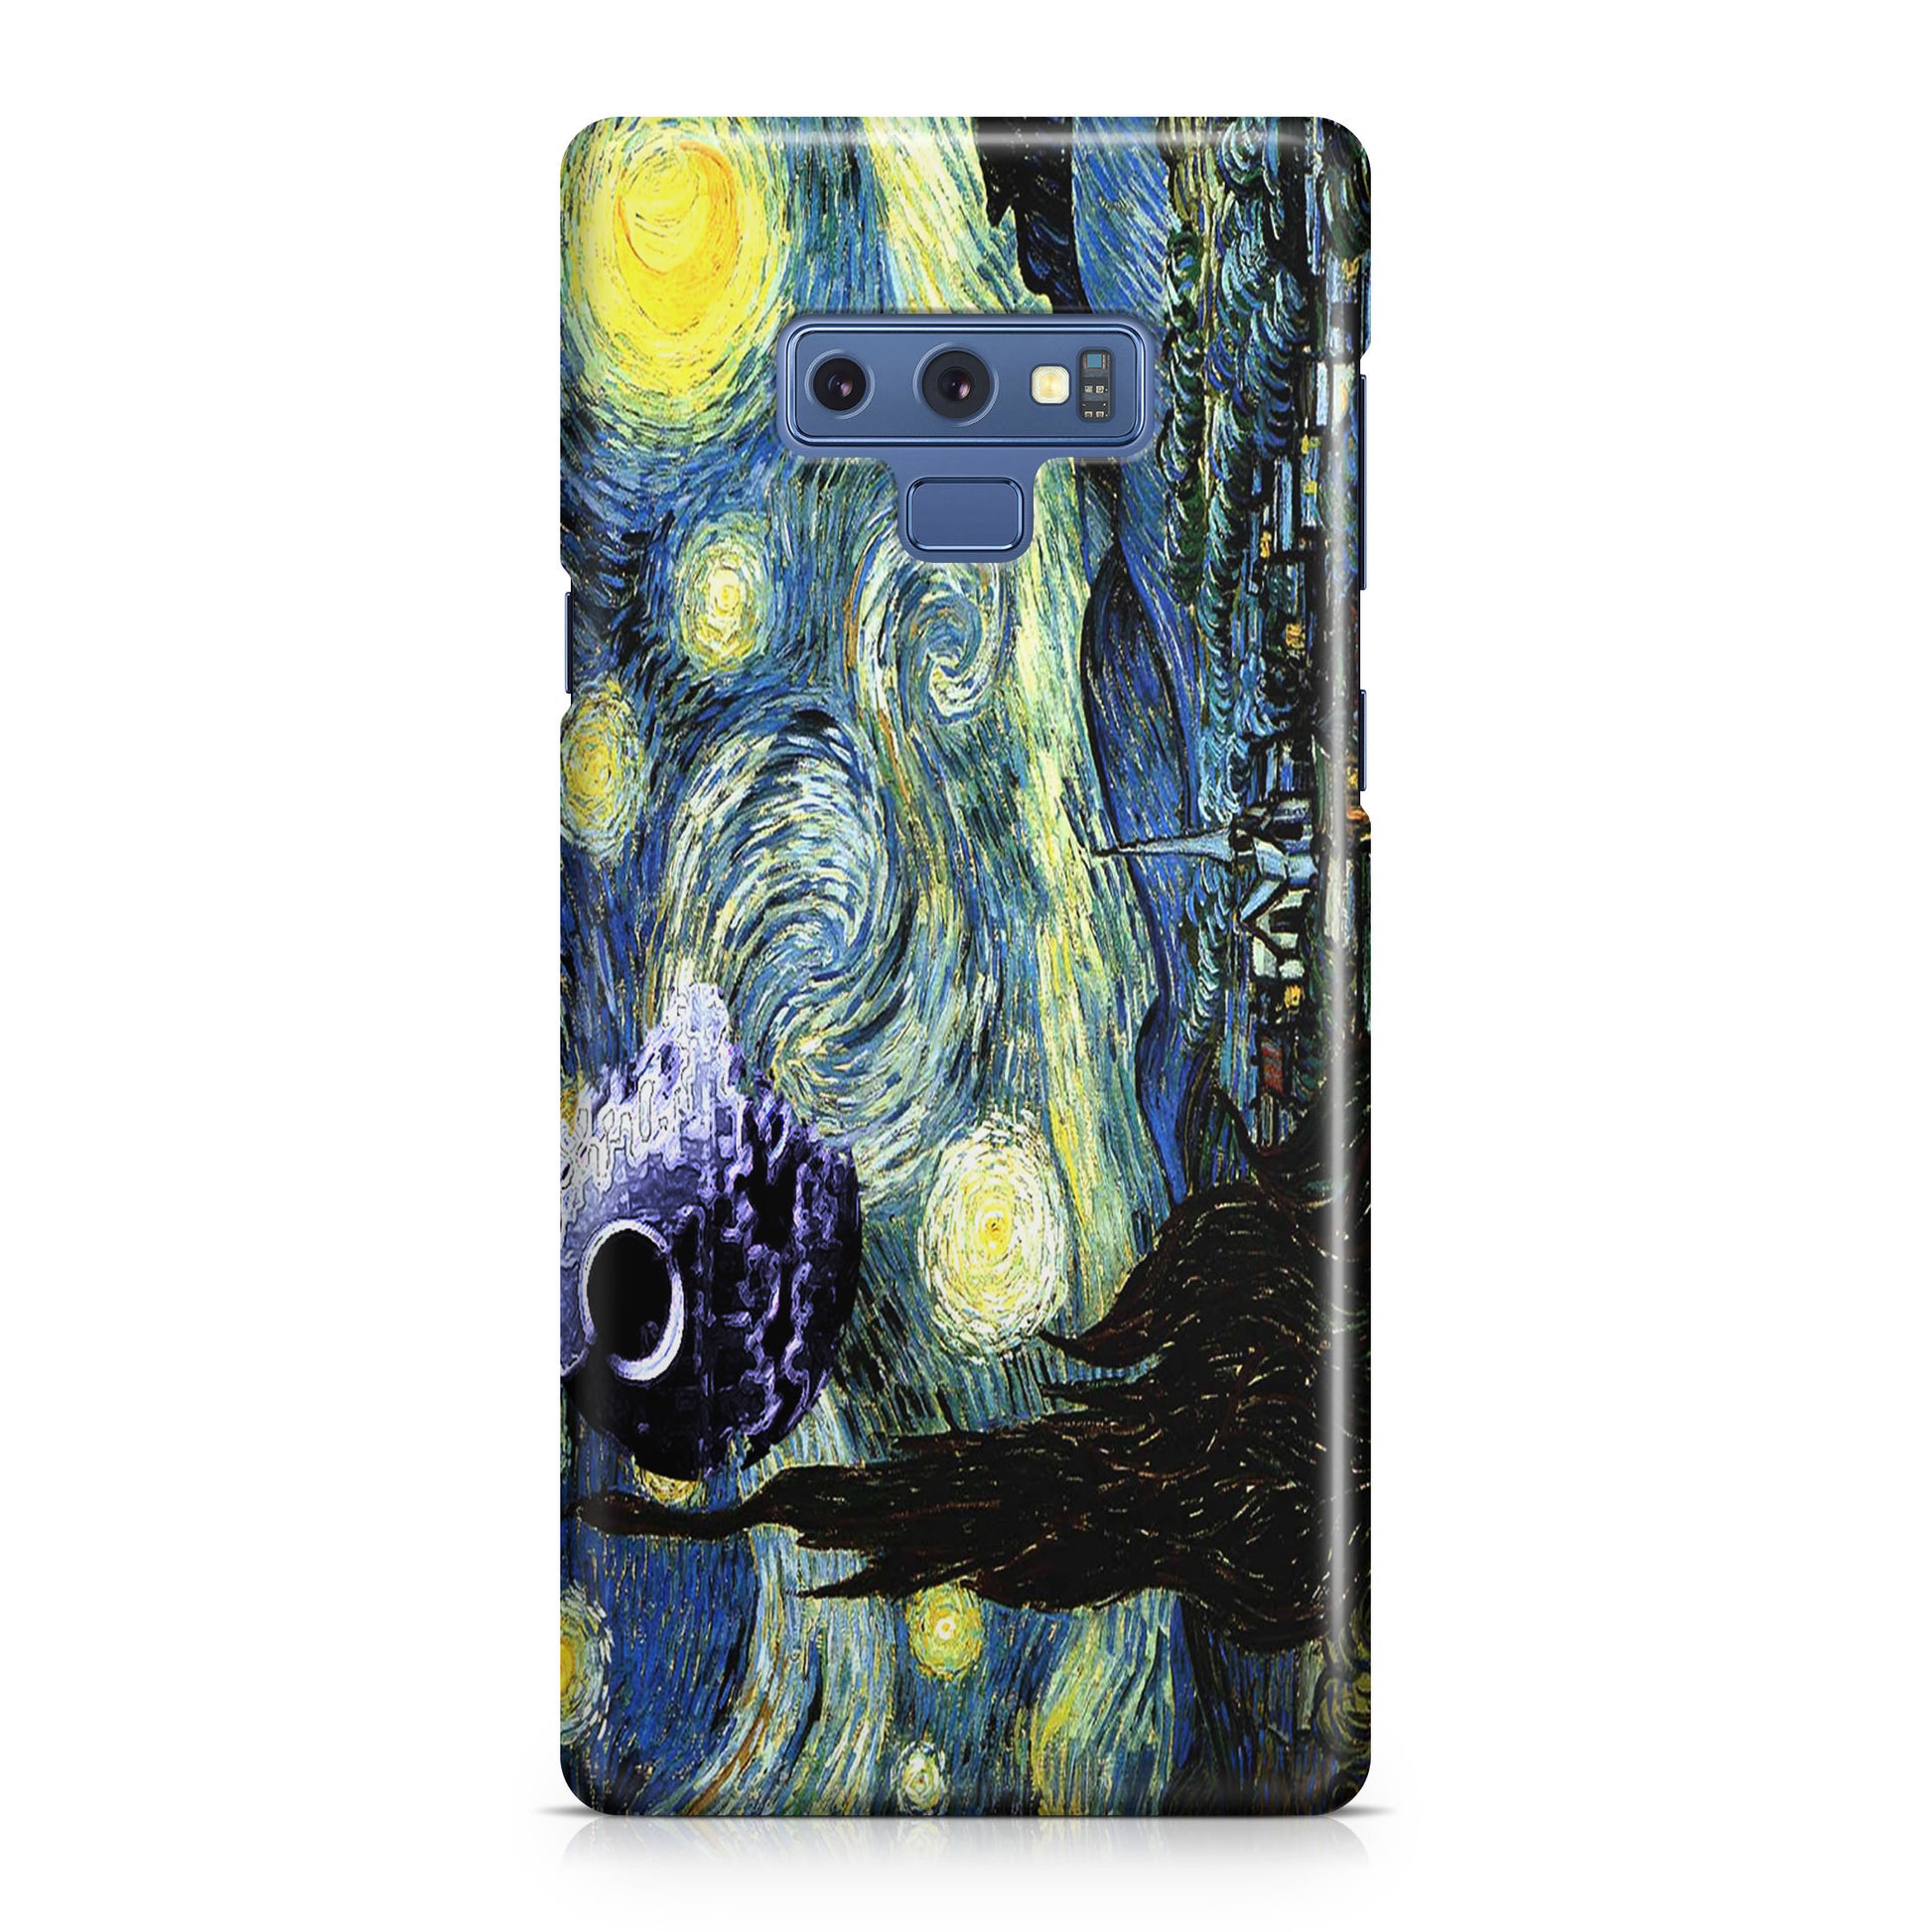 Skellington on a Starry Night Galaxy Note 9 Case